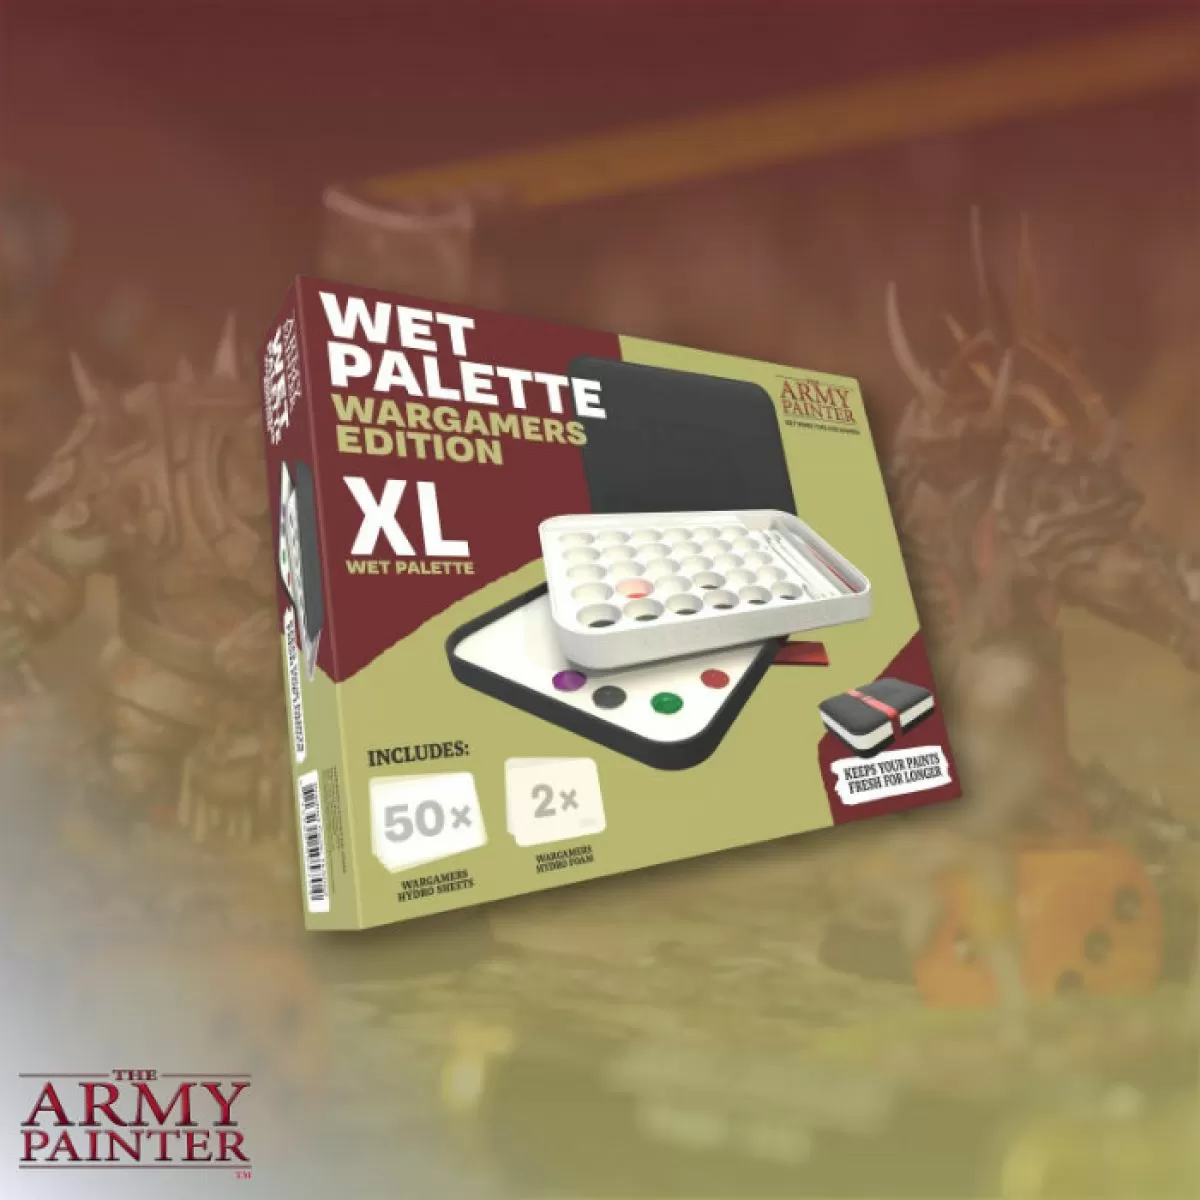 Army Painter: Wet Palette - Wargamers Edition (Preorder)